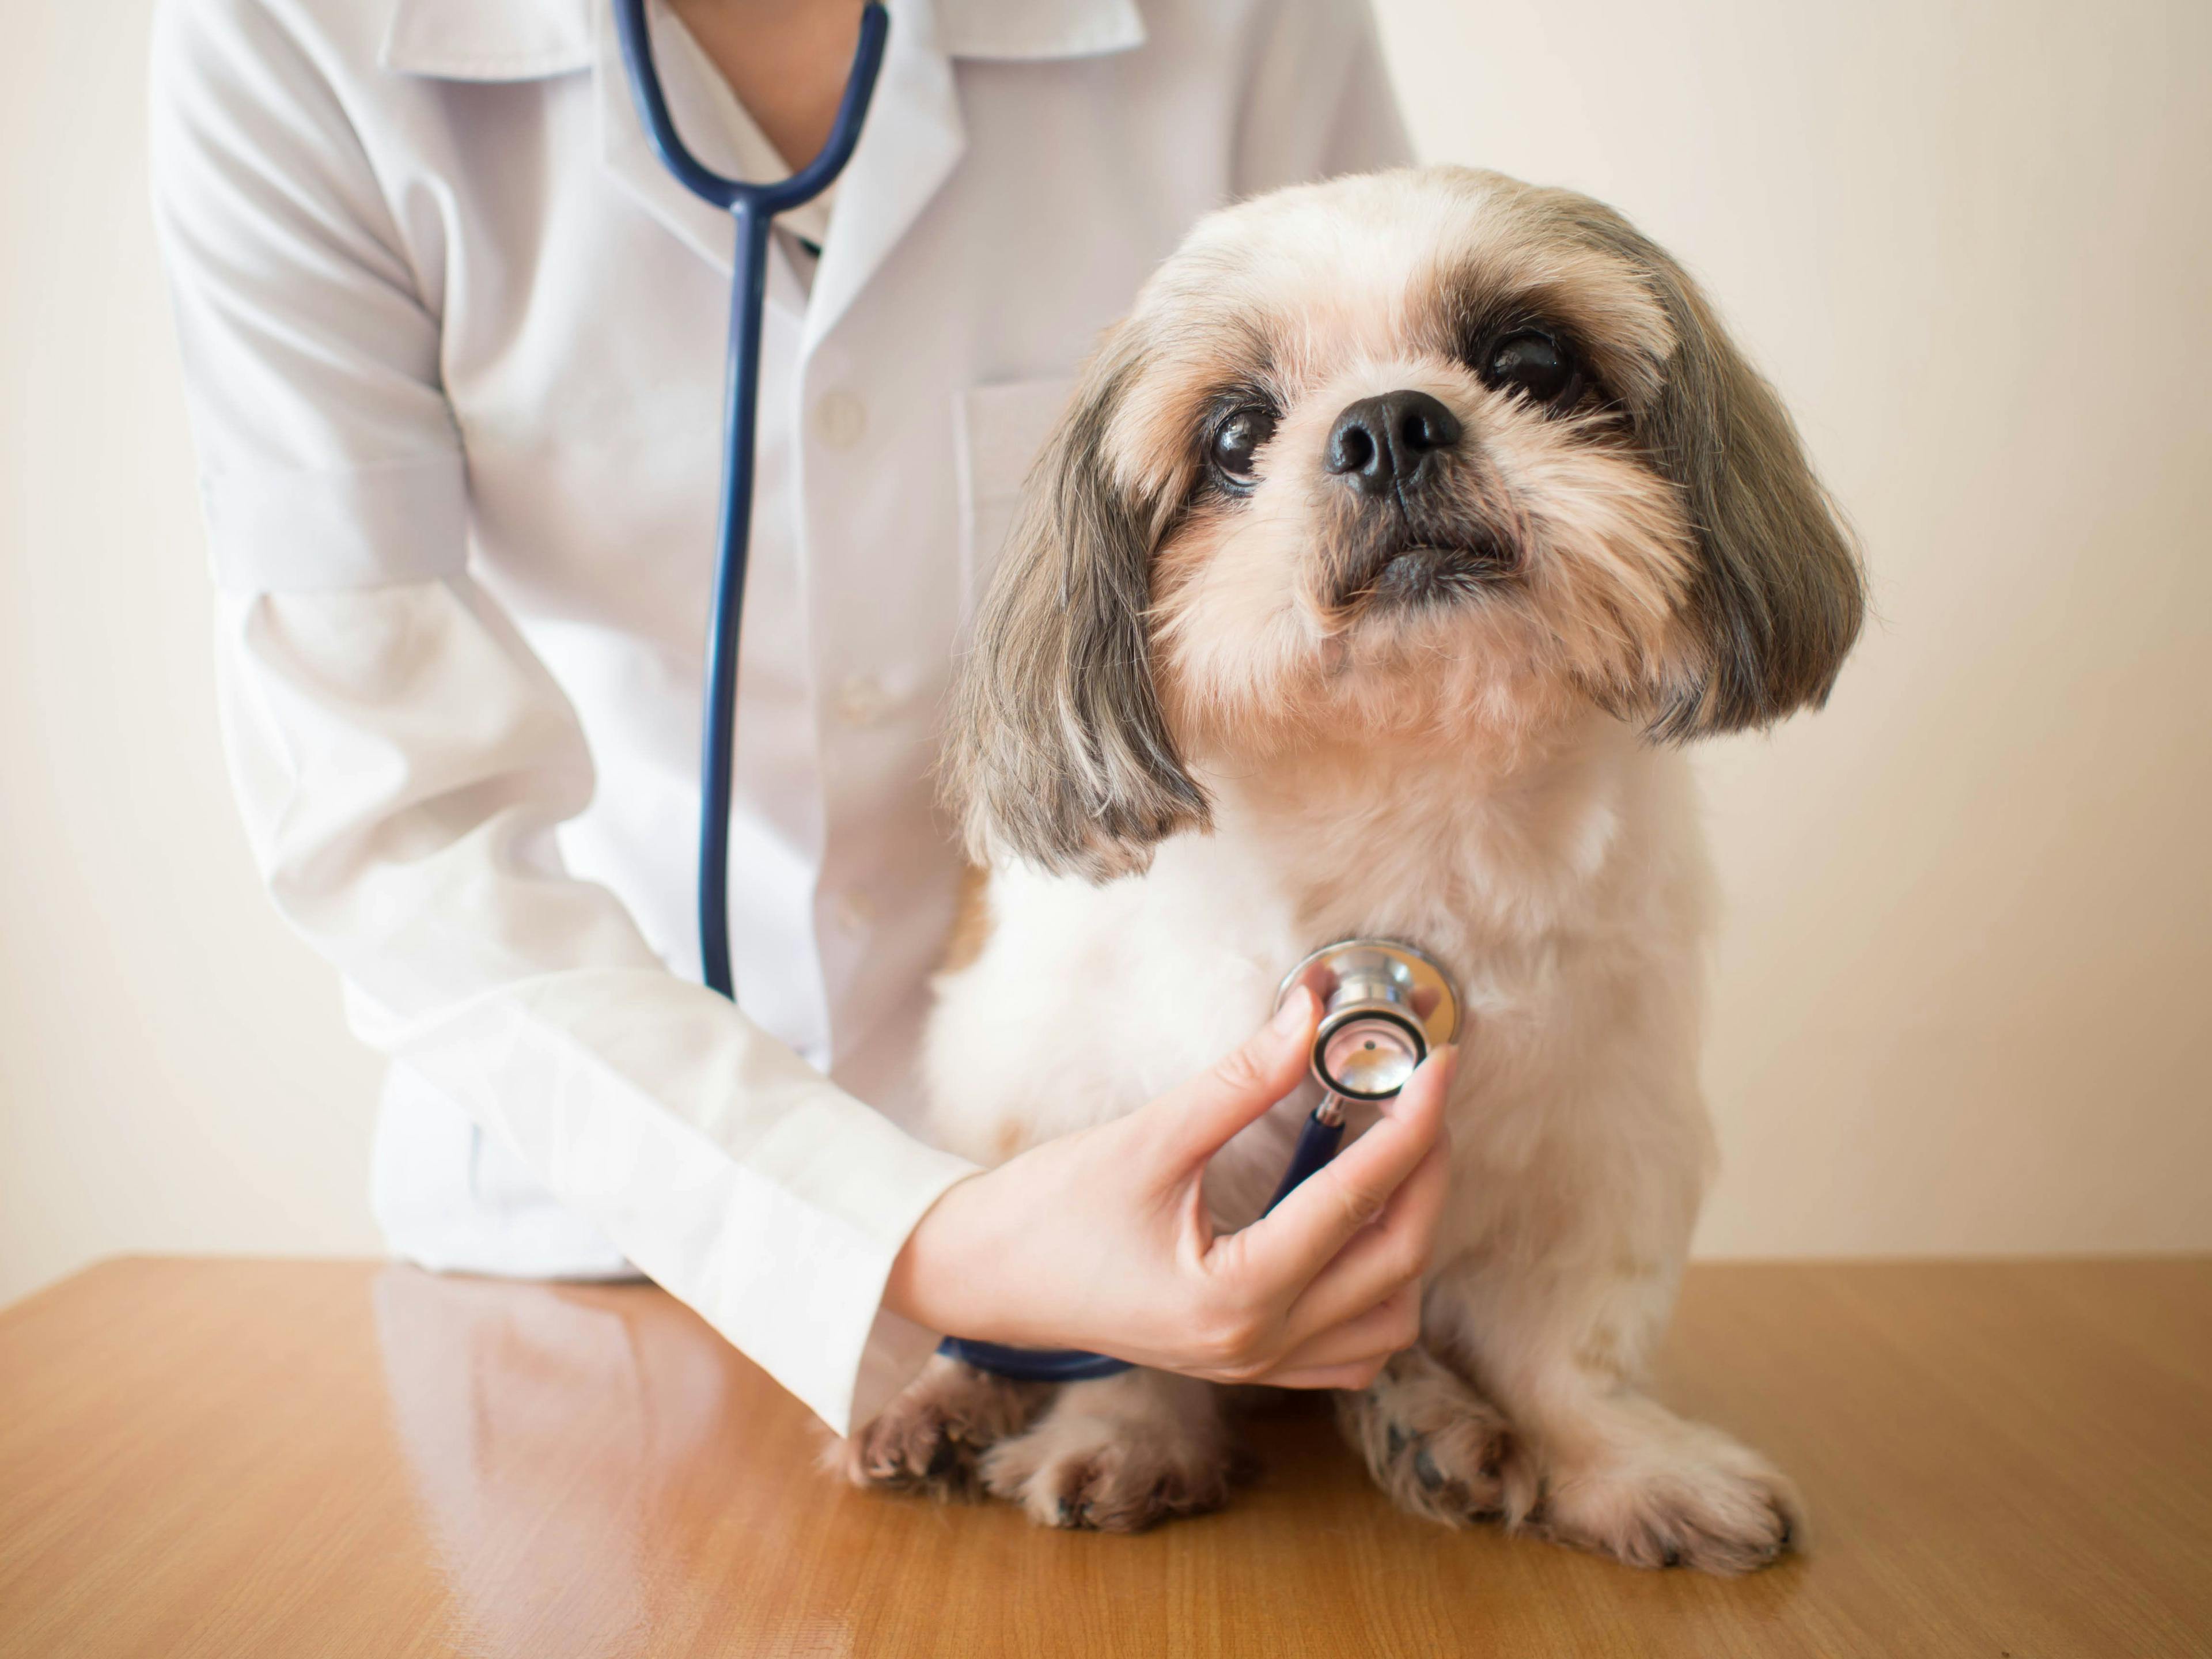 The multi-faceted benefits of relief veterinarians